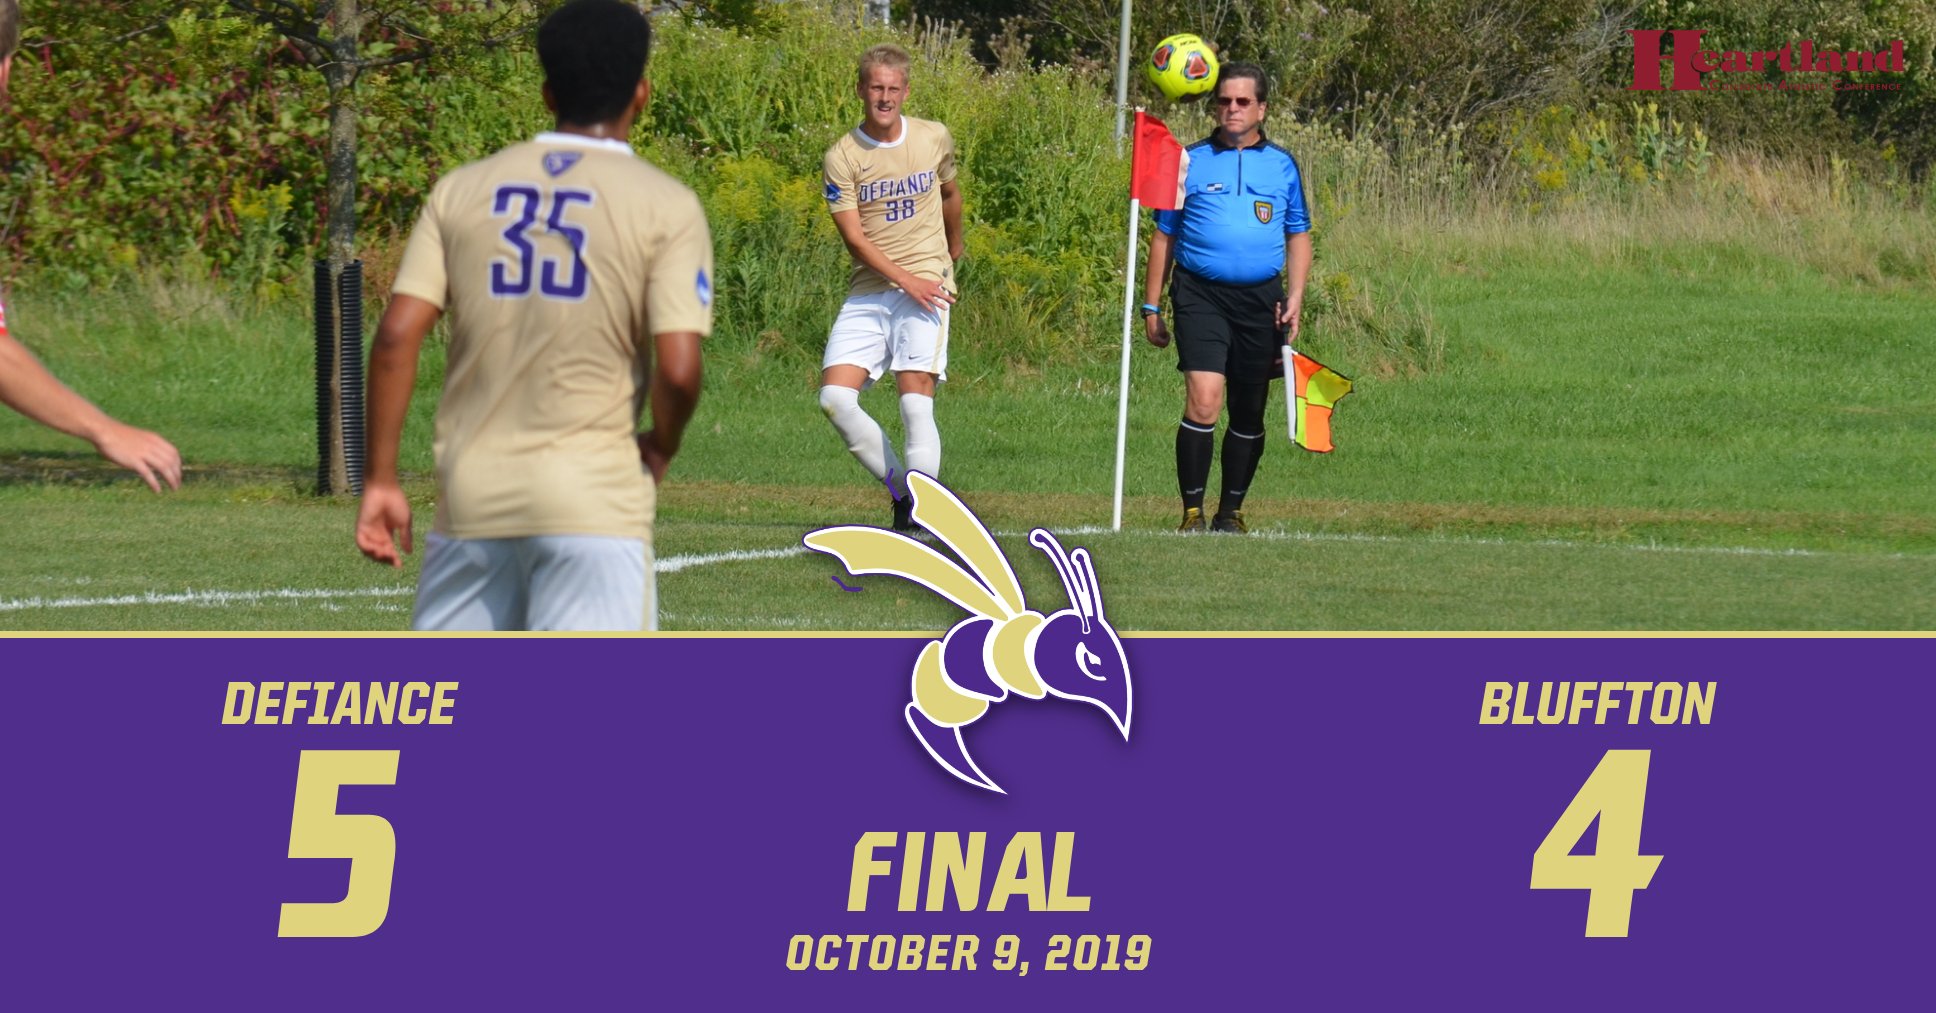 Men's Soccer Continues Winning Ways at Bluffton